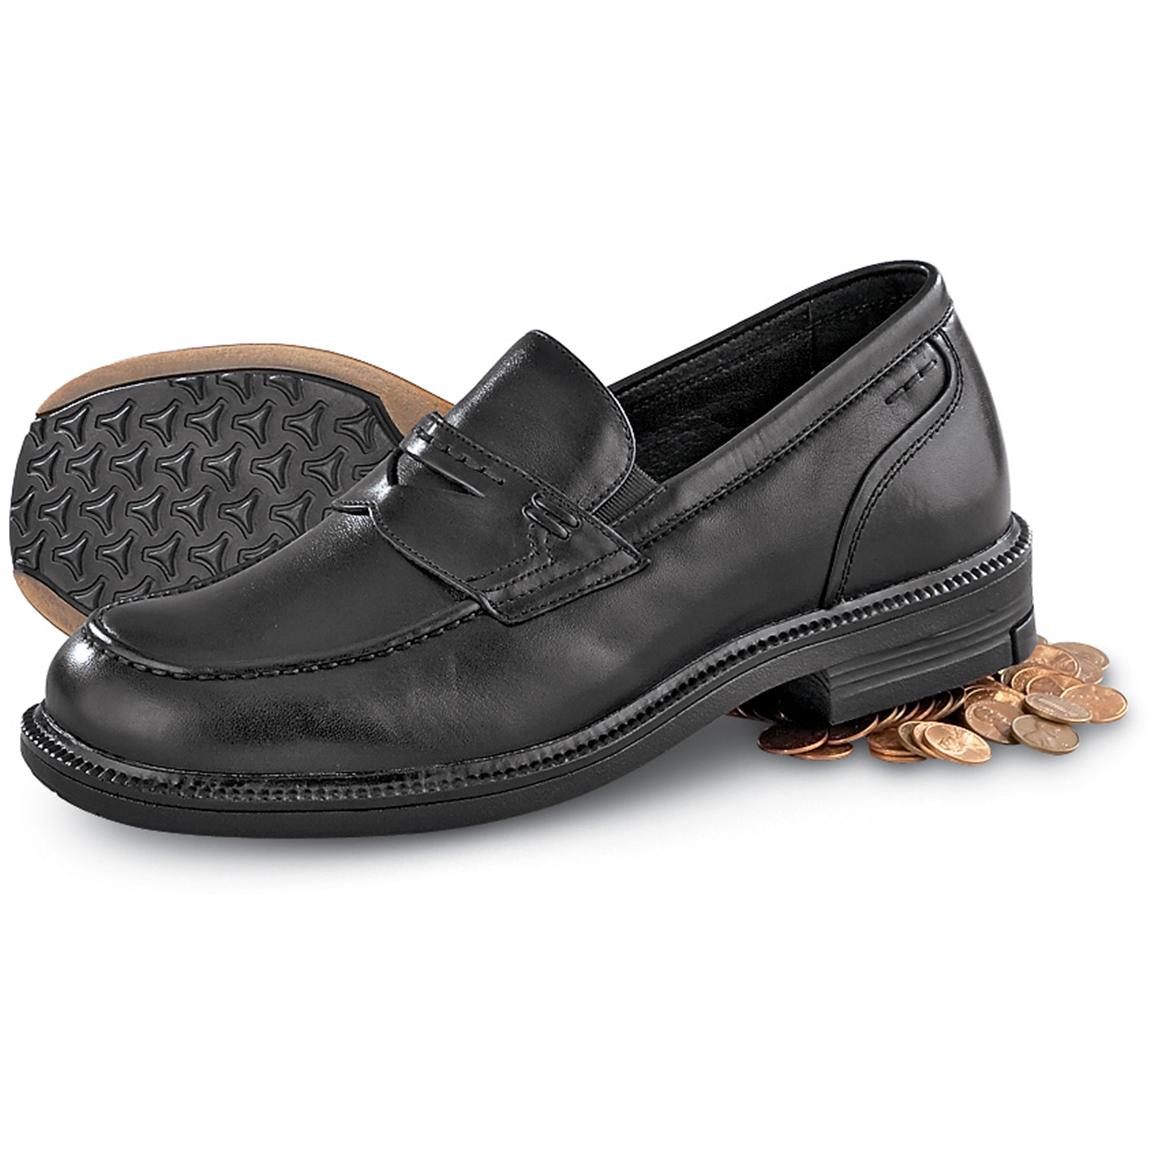 Hush Puppies Loafers Black